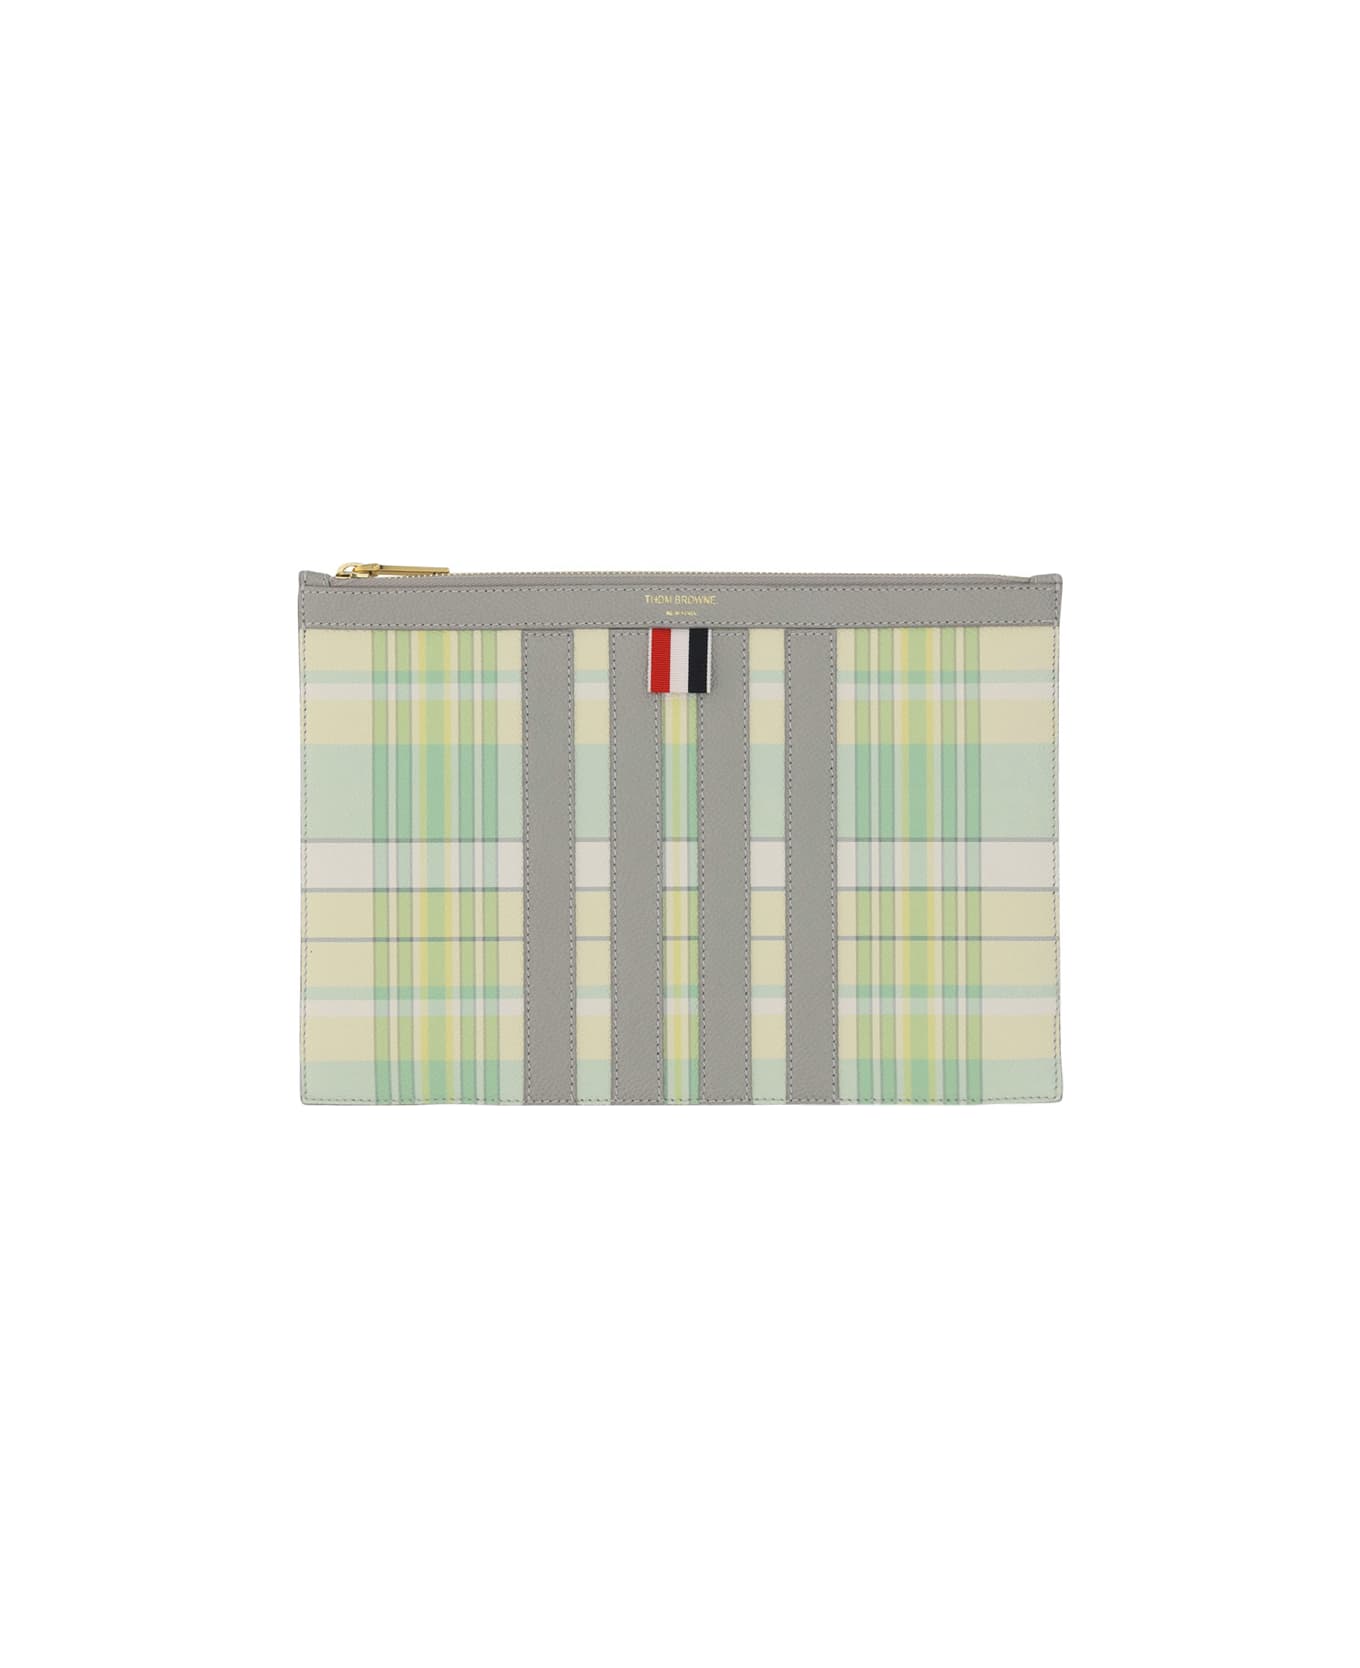 Thom Browne Small Document Holder - Pastel Green